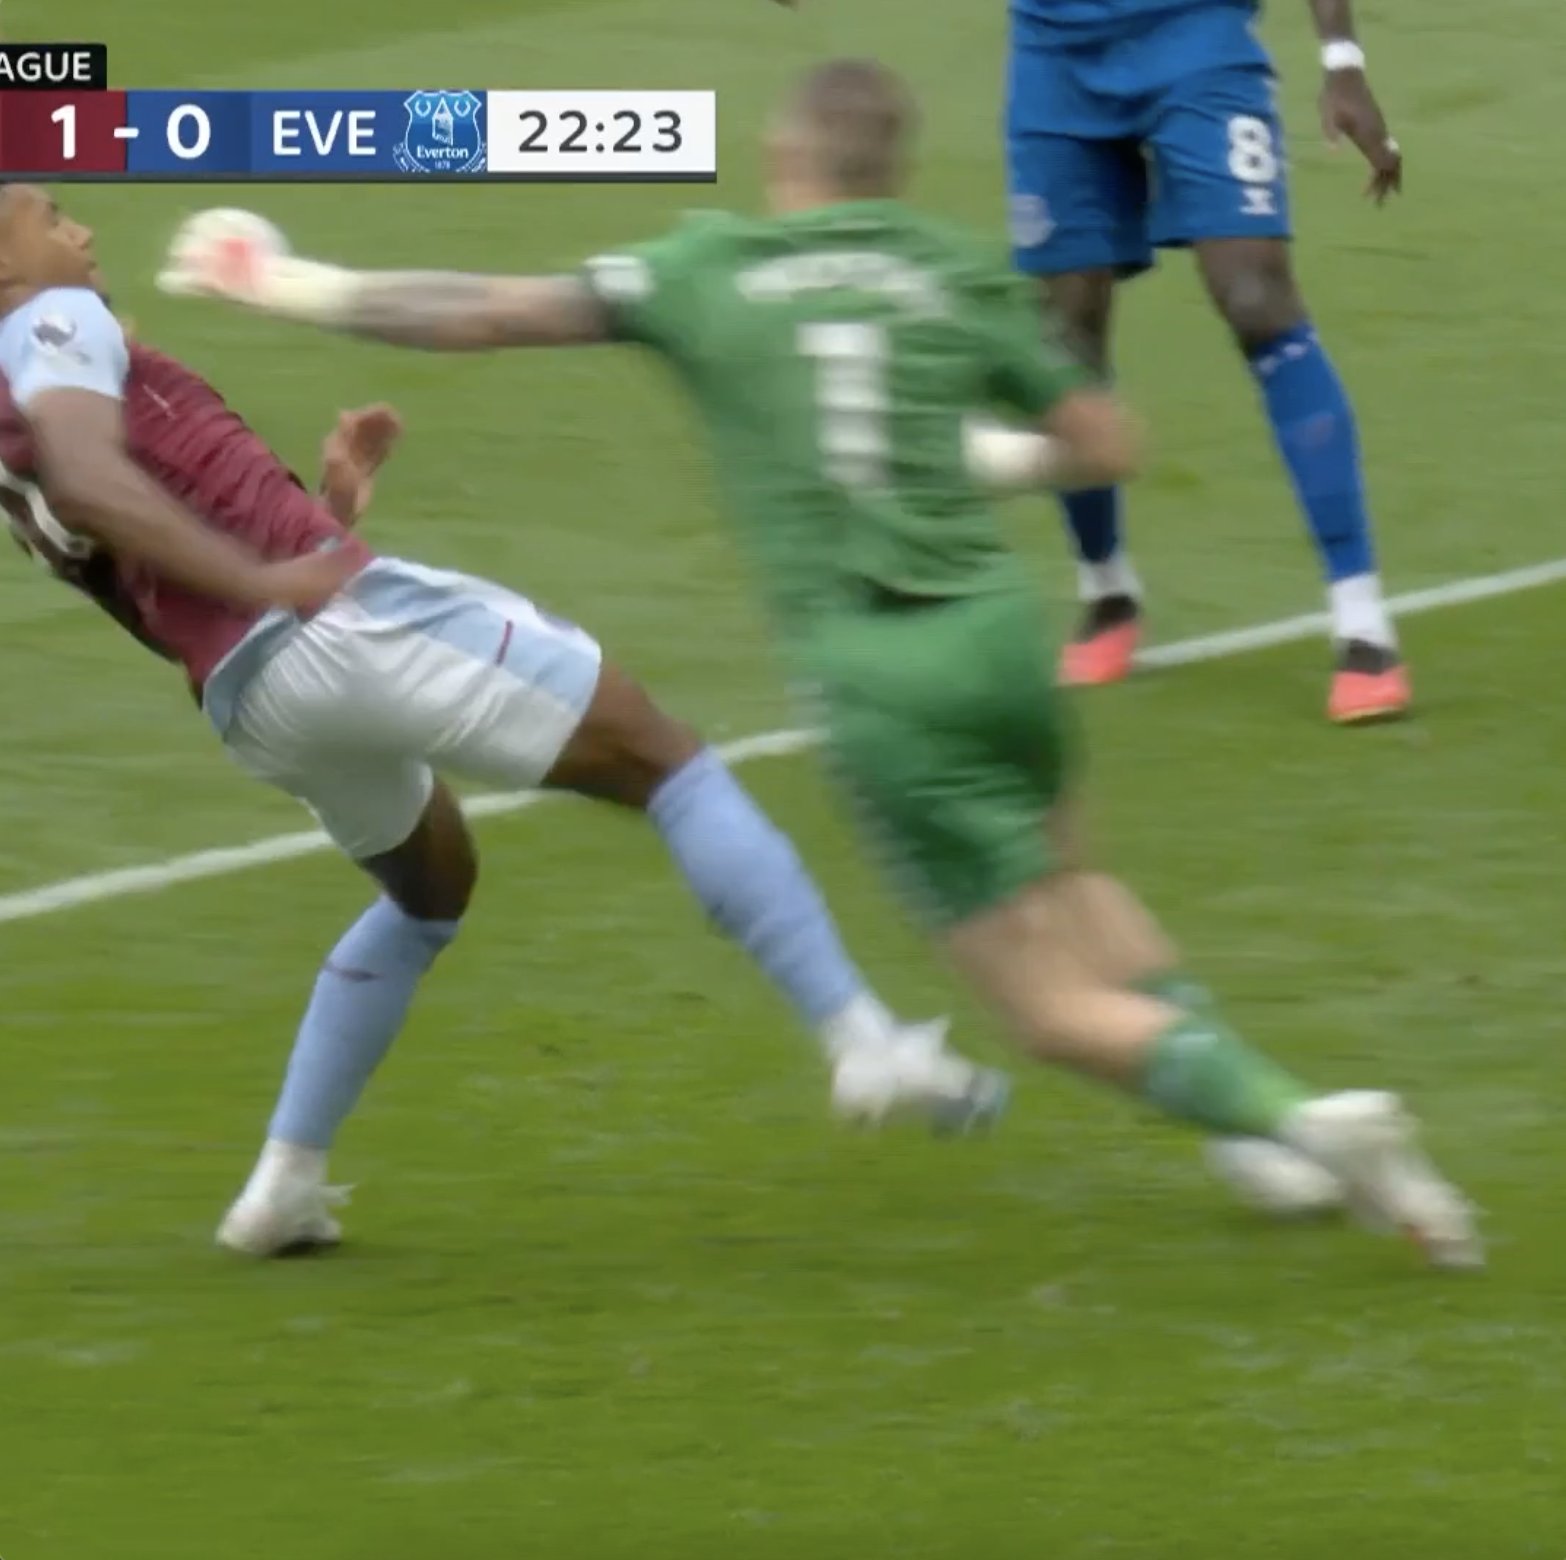 Aston Villa were awarded a penalty and doubled their lead after this foul on Jordan Pickford in the box. 📺 @USANetwork